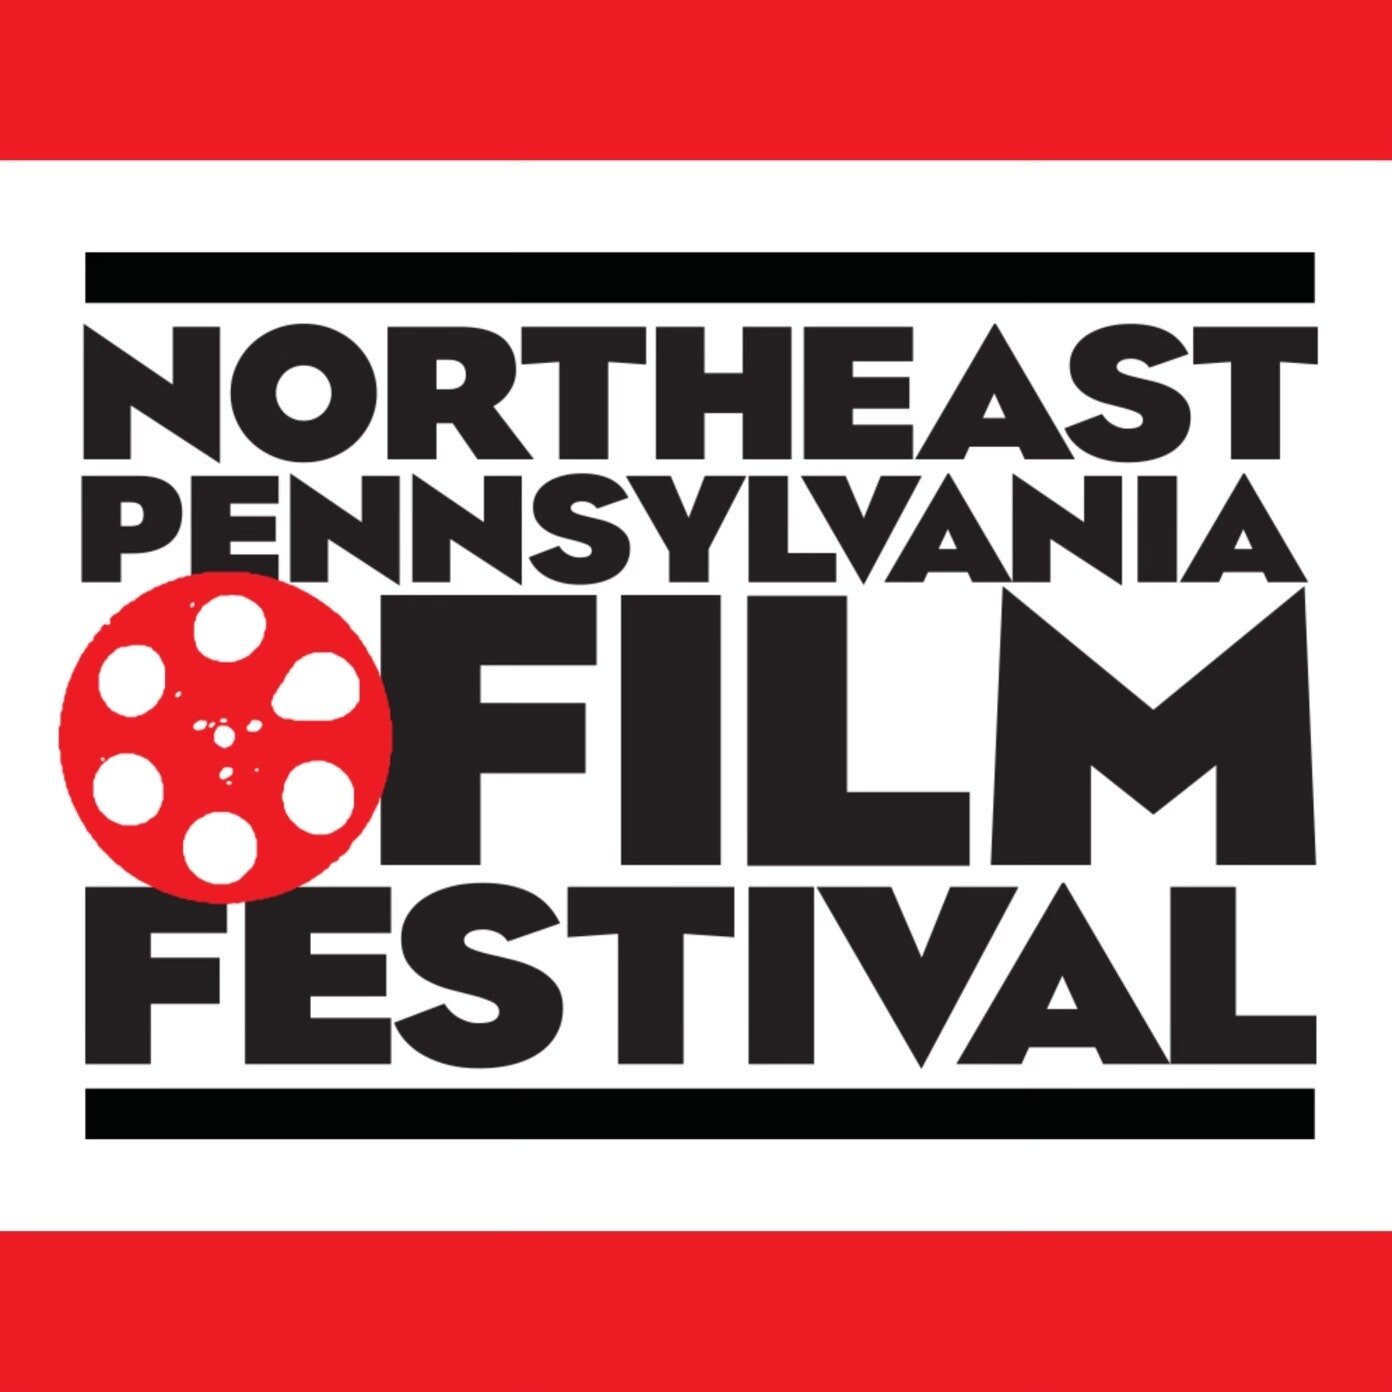 The Northeast Pennsylvania Film Festival has posted its schedule, and OH CRAPPY DAY will be screening at 3 PM on Saturday, April 15. The screening will take place in the auditorium of the Waverly Community House, 1115 N. Abington Road, Waverly, Penns